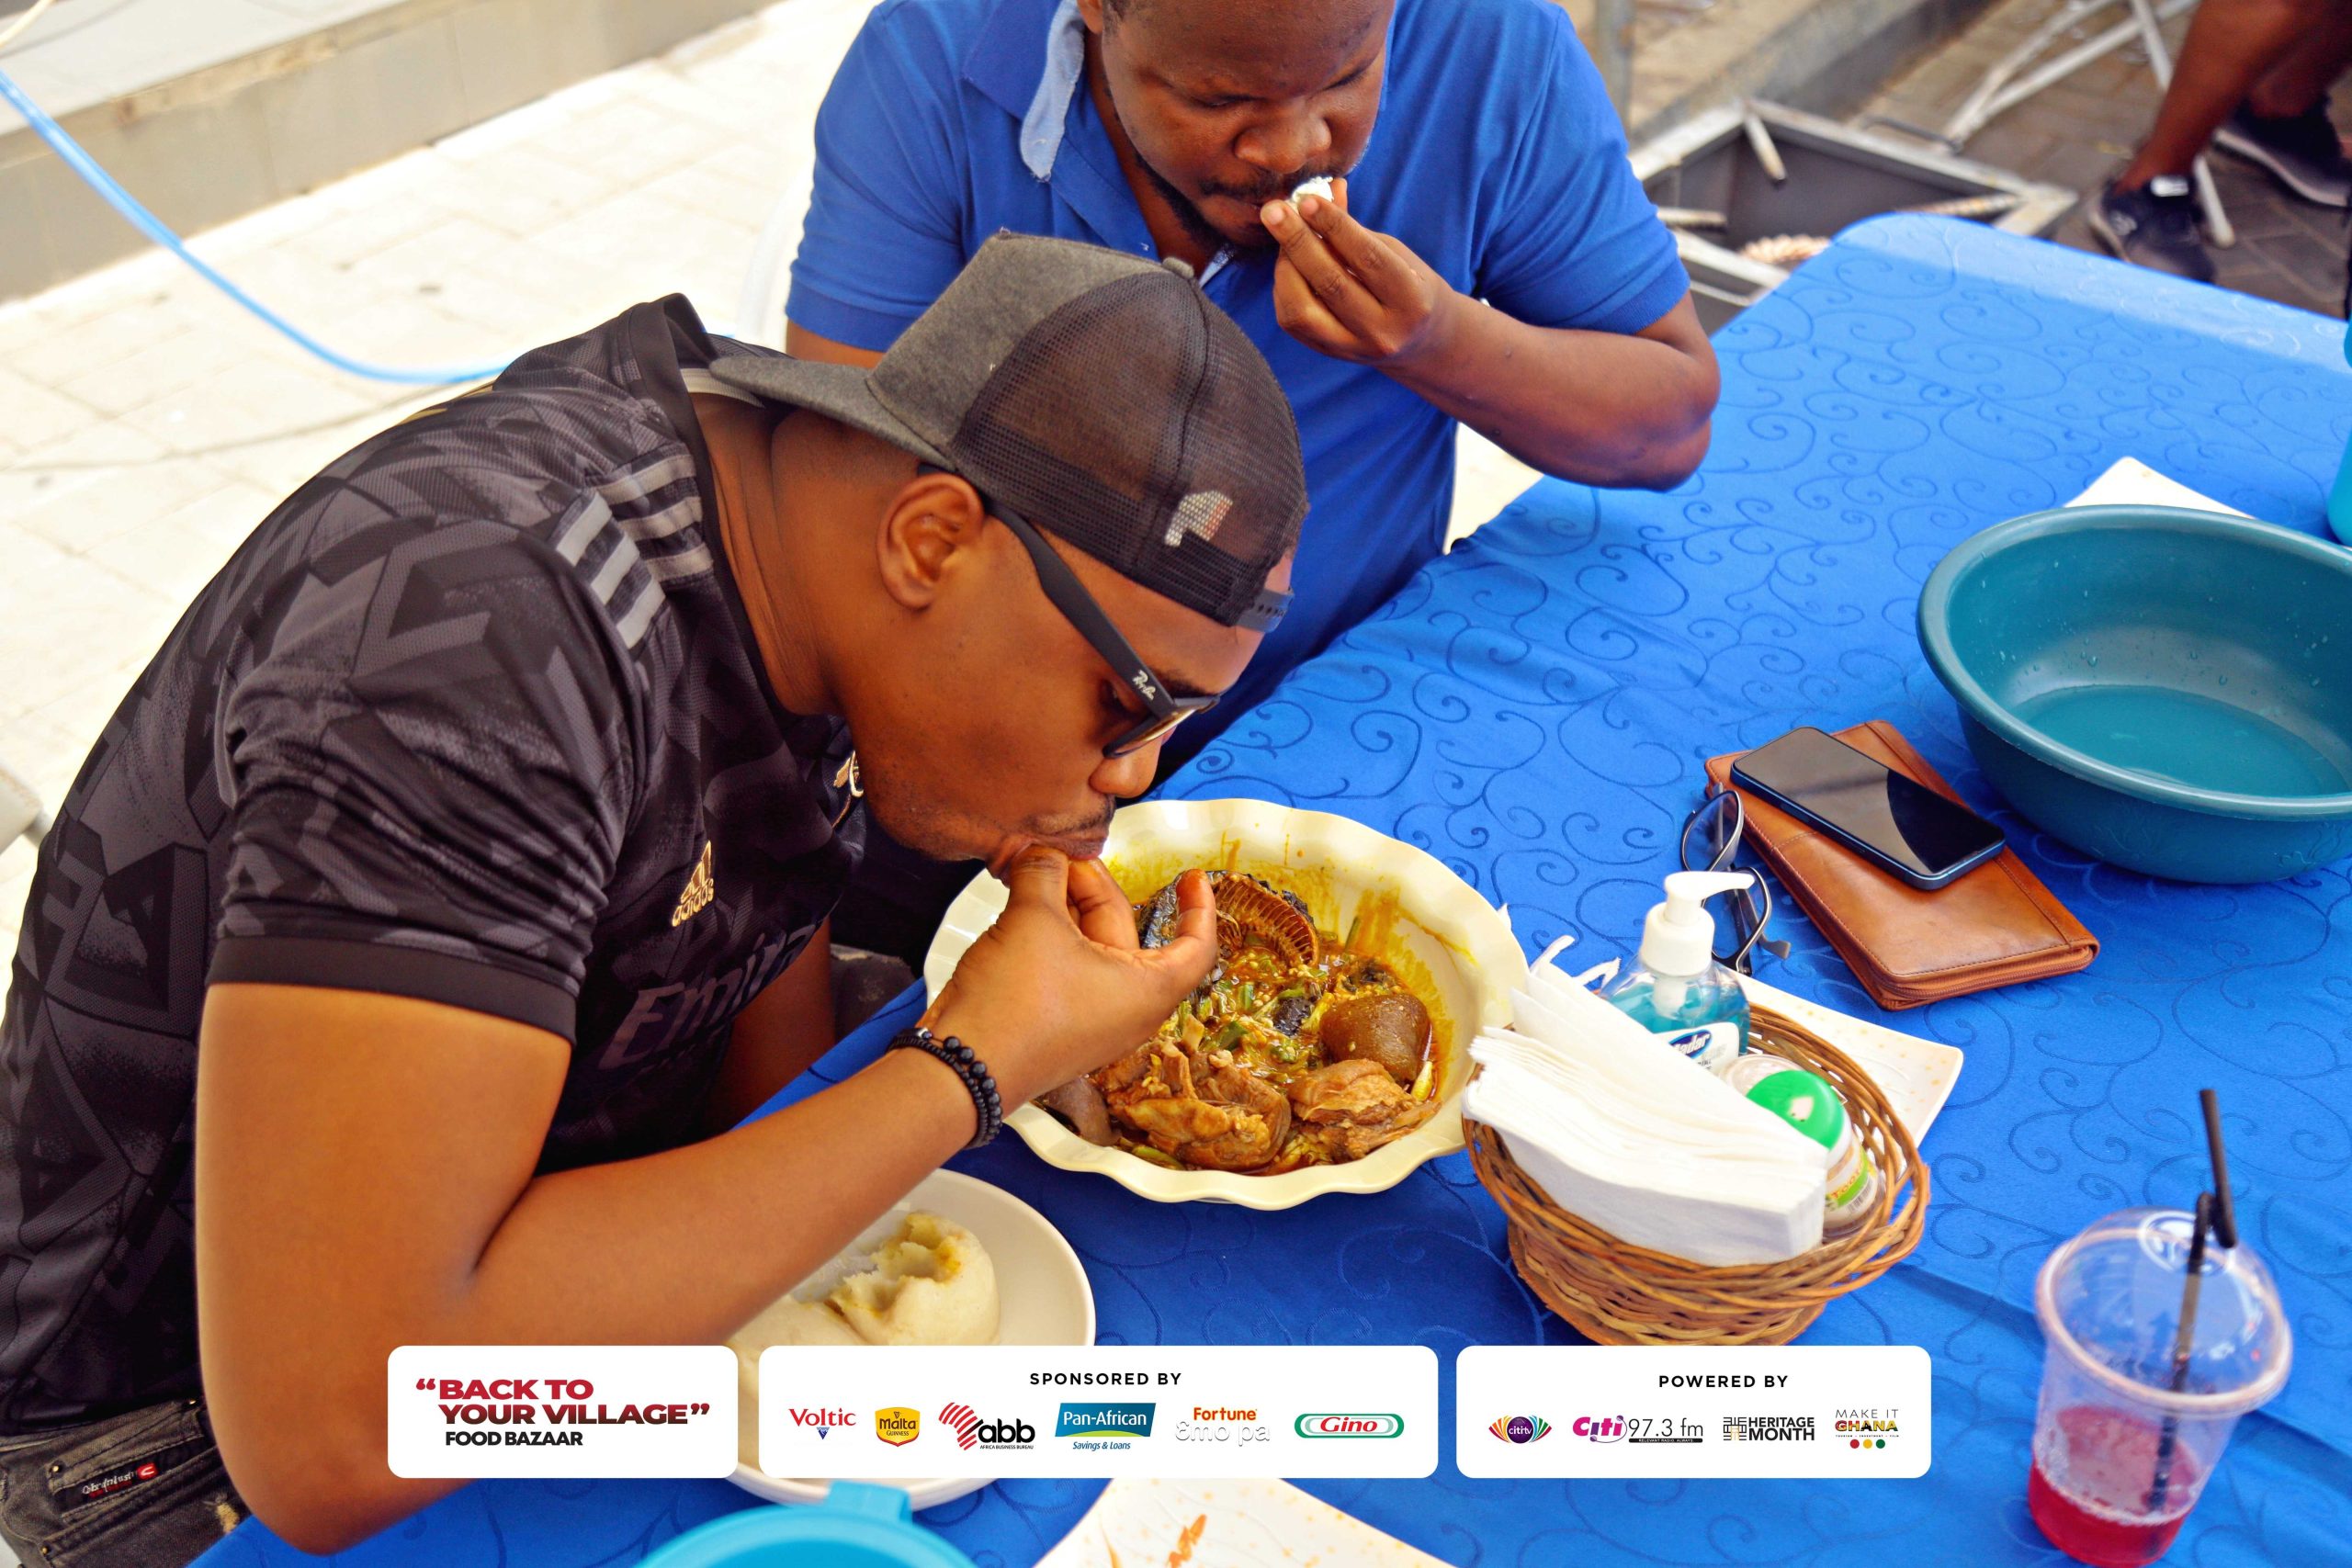 Over 30,000 patrons participated in two-day Back to Your Village Food Bazaar